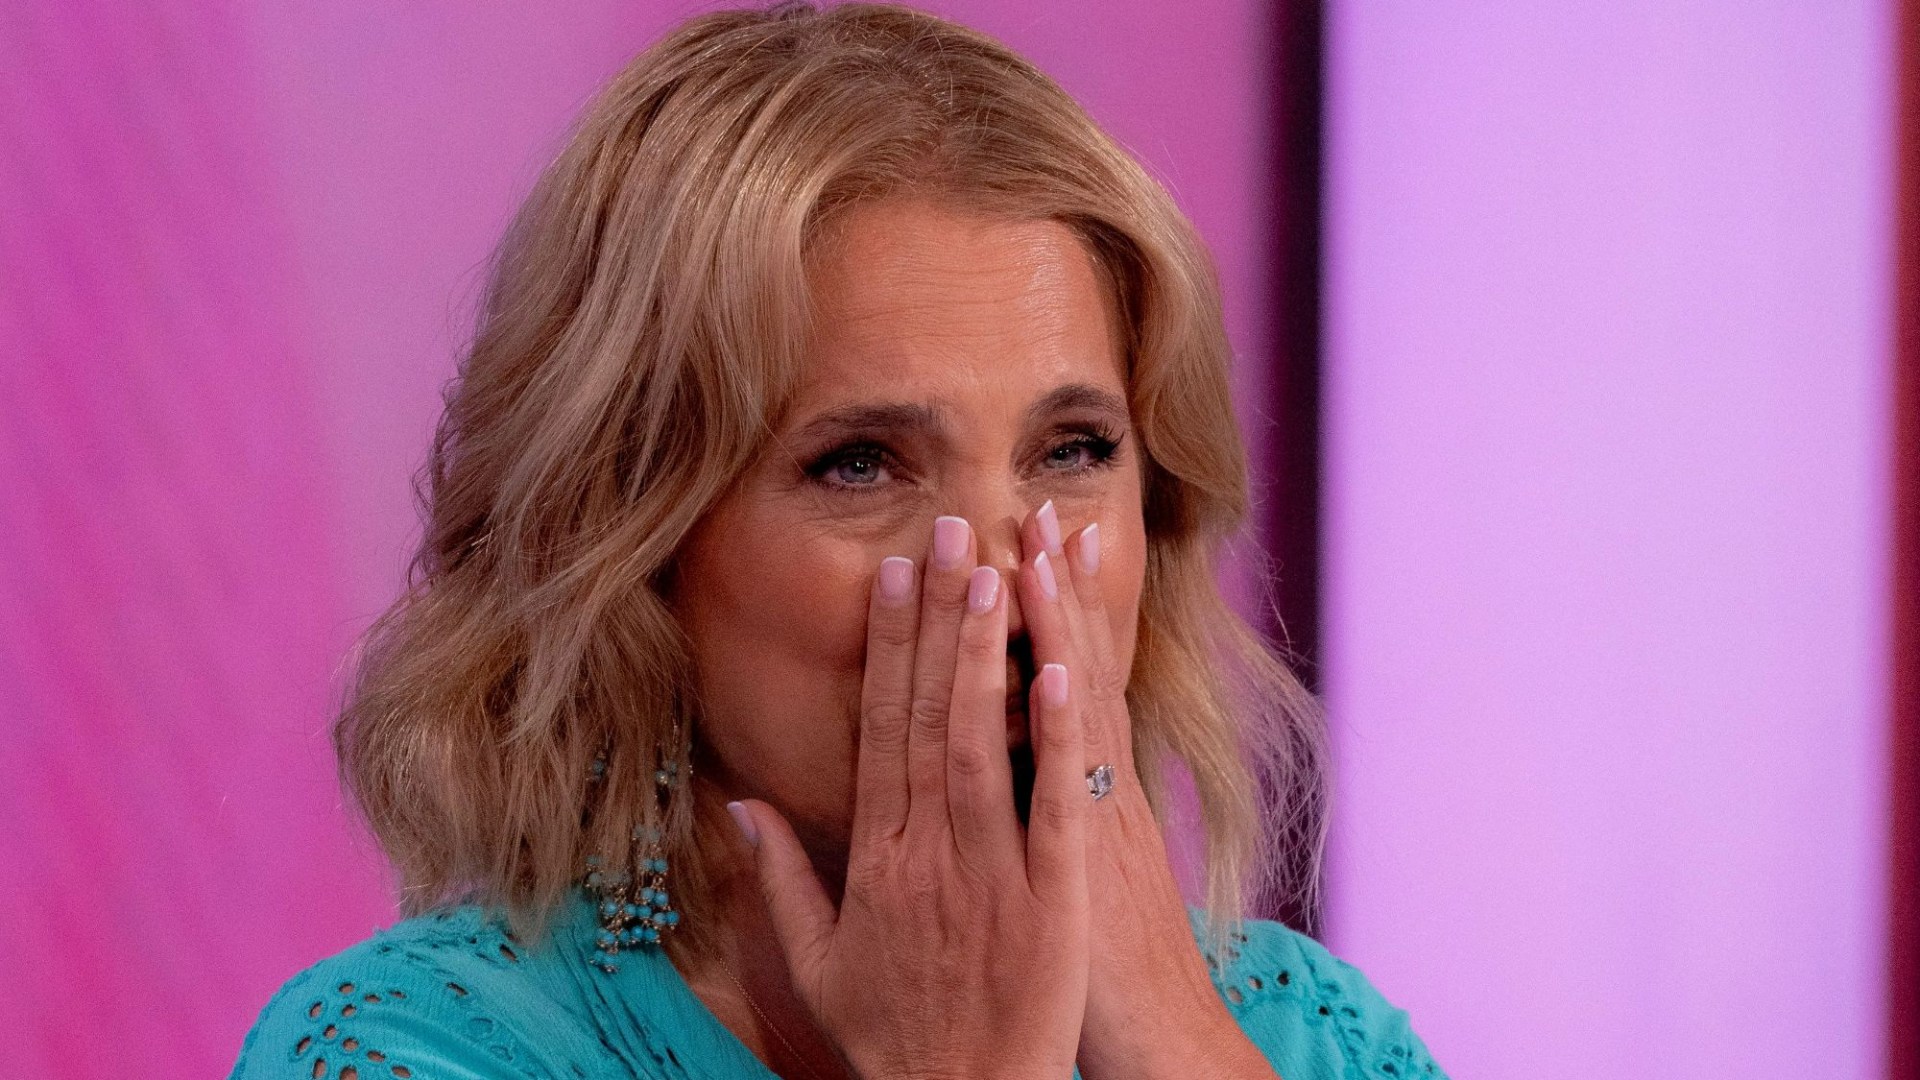 Jasmine Harman reveals truth behind bursting into tears live on Loose Women in emotional message to fans [Video]